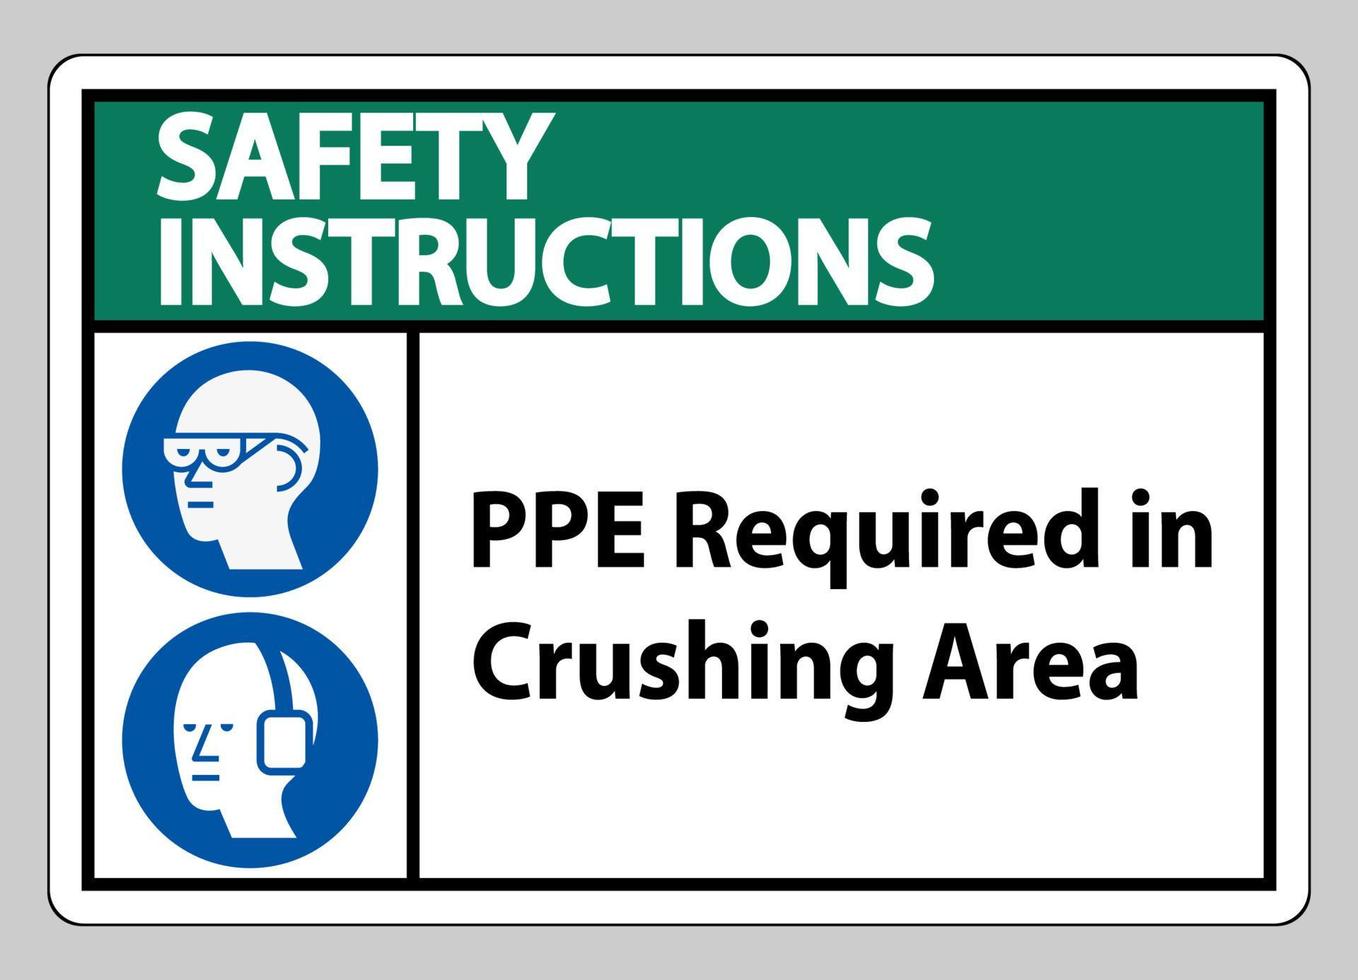 Safety Instructions Sign PPE Required In Crushing Area Isolate on White Background vector